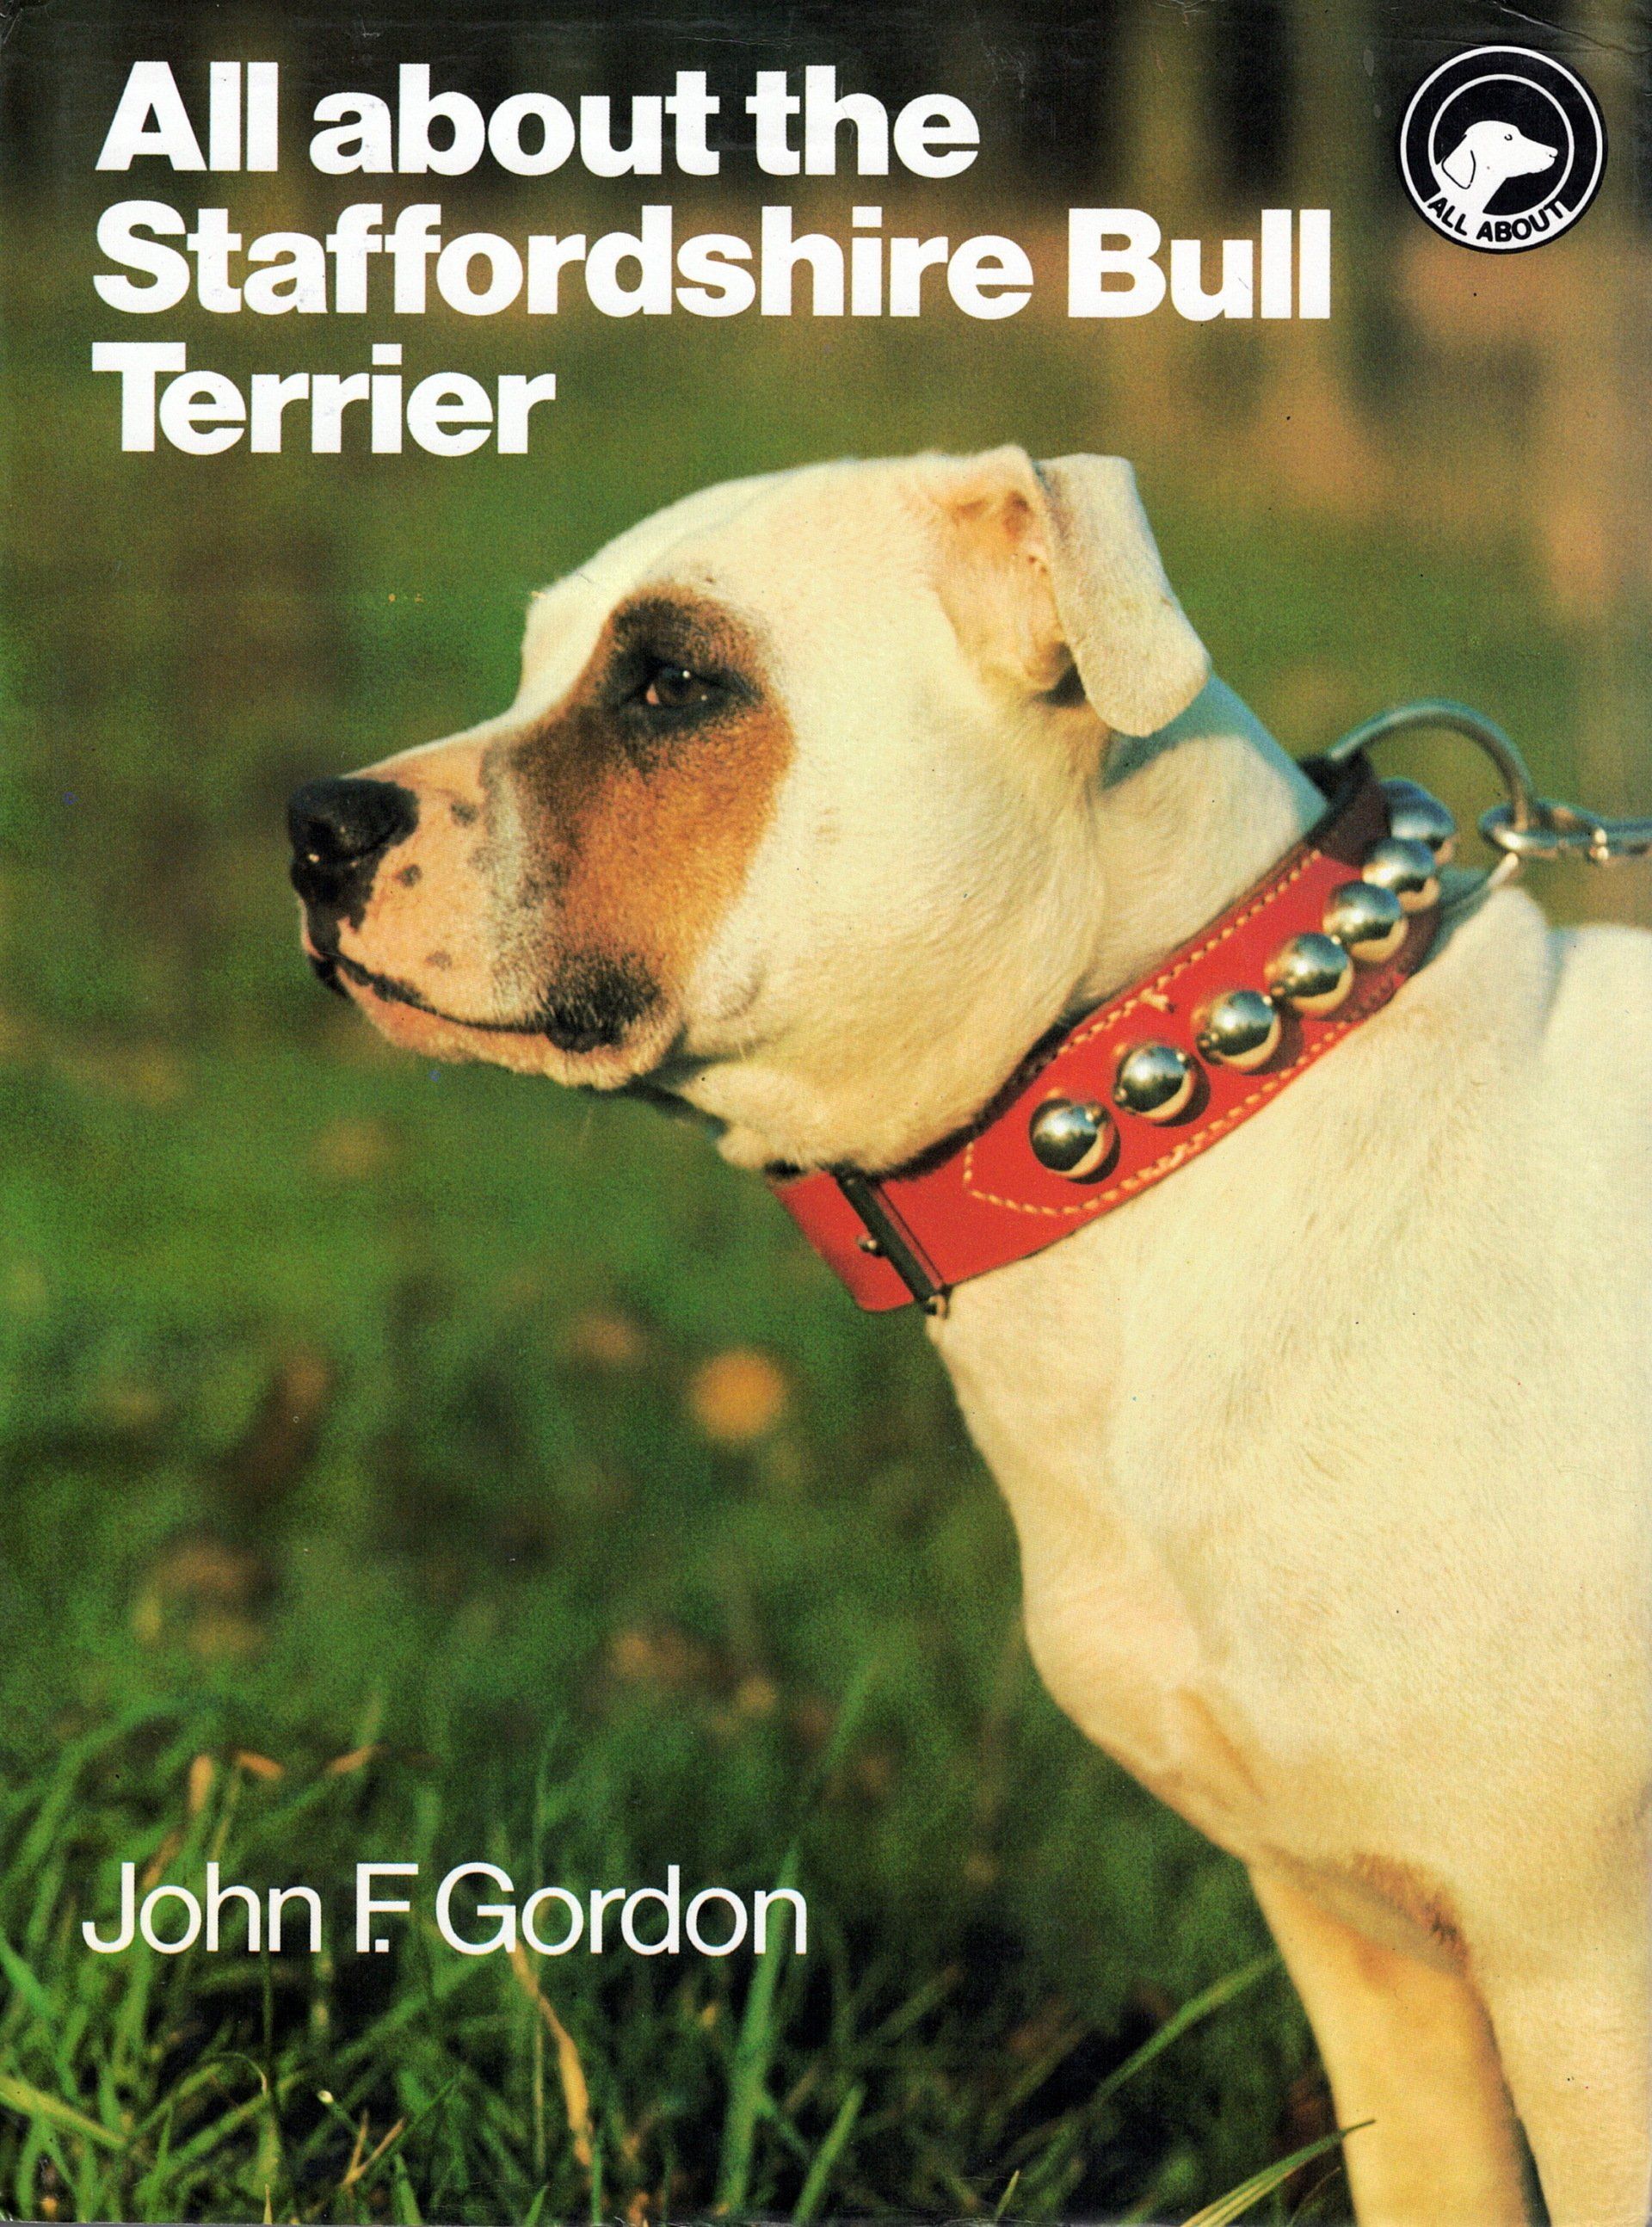 All about the Staffordshire Bull Terrier by John F Gordon